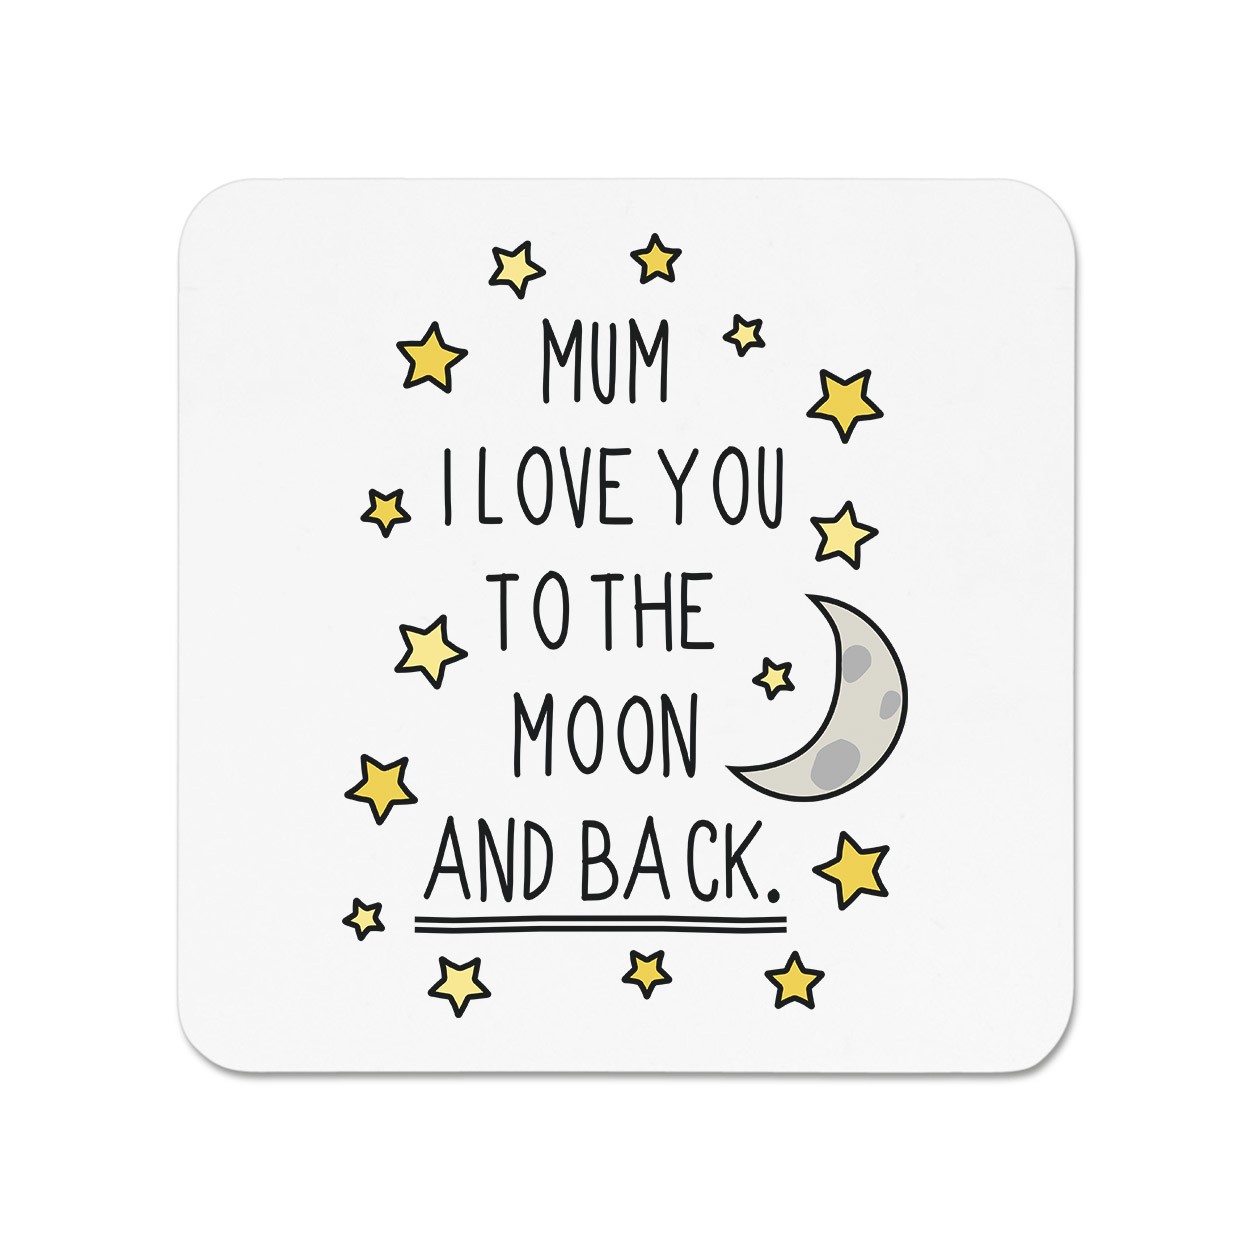 Mum I Love You To The Moon And Back Fridge Magnet